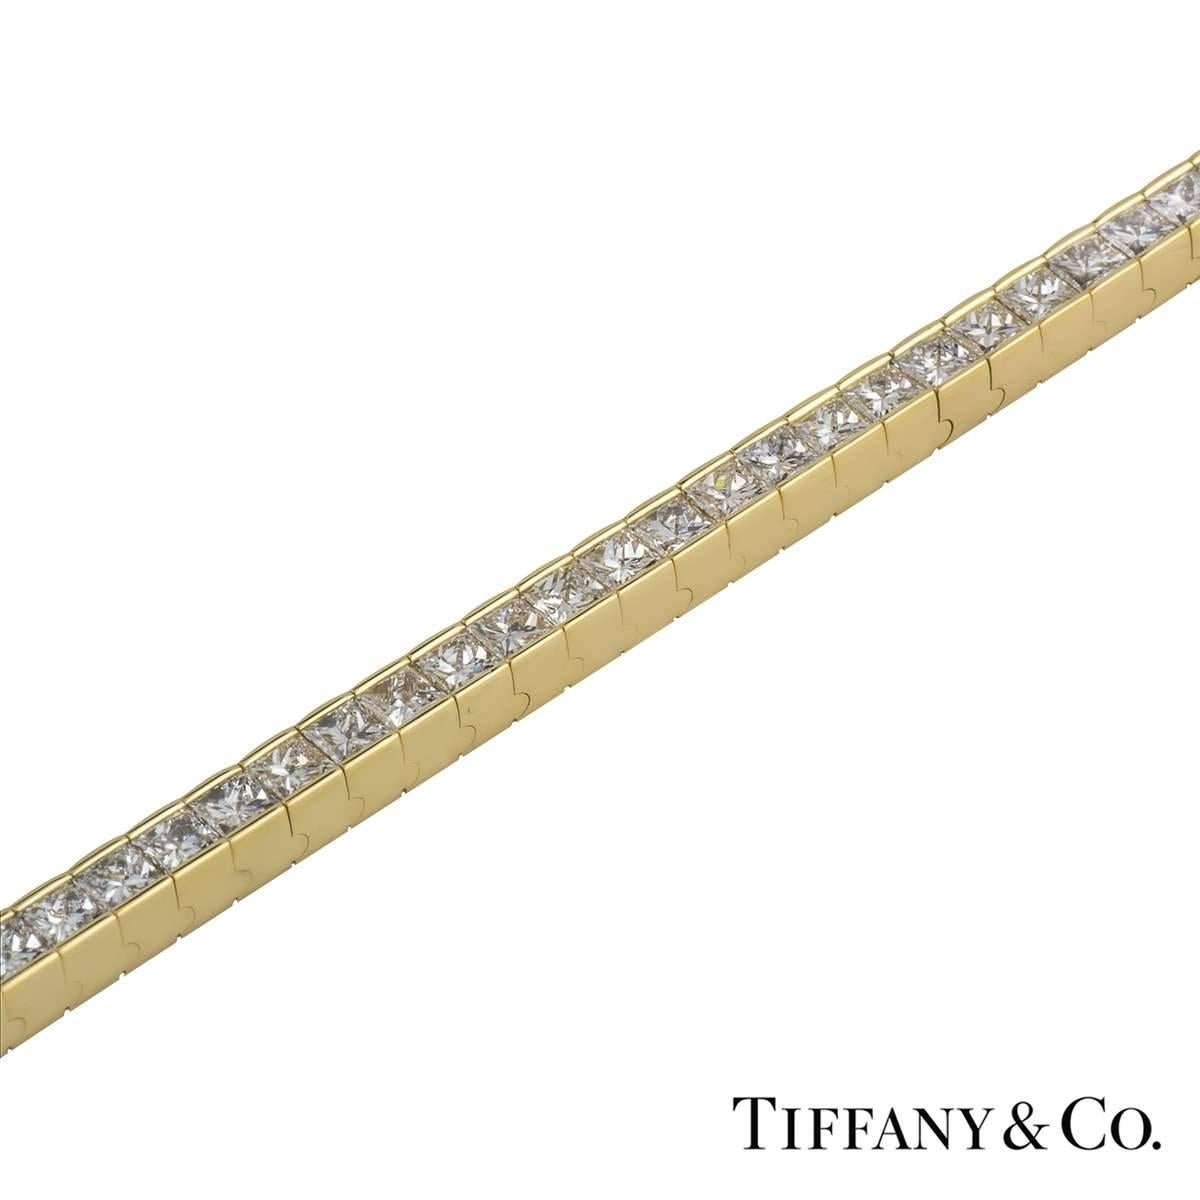 A beautiful 18k yellow gold diamond line bracelet by Tiffany & Co. The bracelet features 60 princess cut diamonds totalling approximately 15.00ct and VS+ in clarity. The bracelet measures approximately 7.25 inches and has a gross weight of